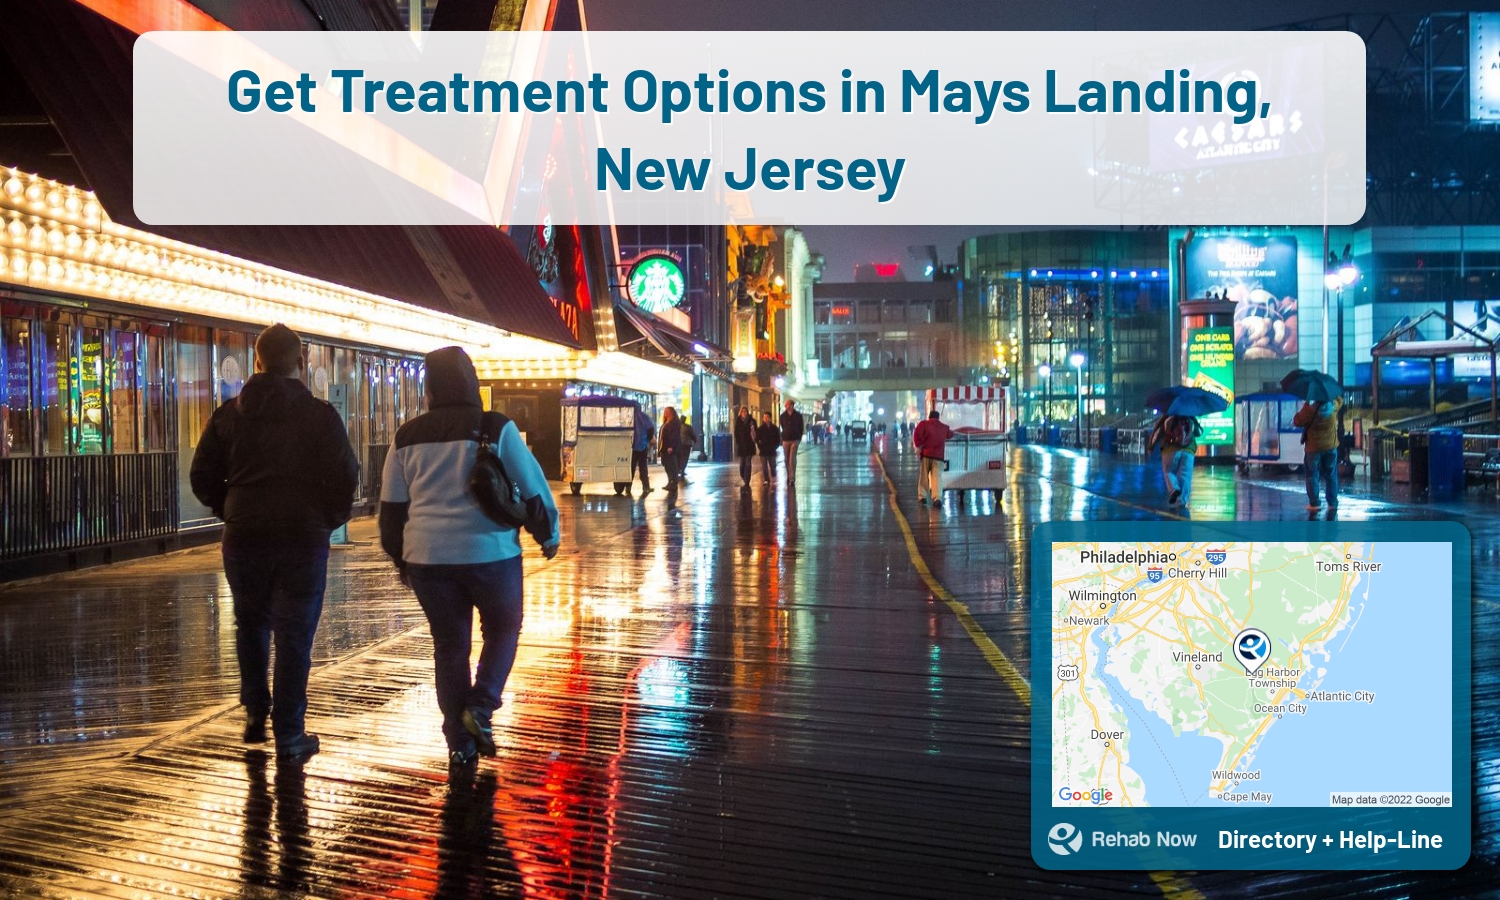 Let our expert counselors help find the best addiction treatment in Mays Landing, New Jersey now with a free call to our hotline.